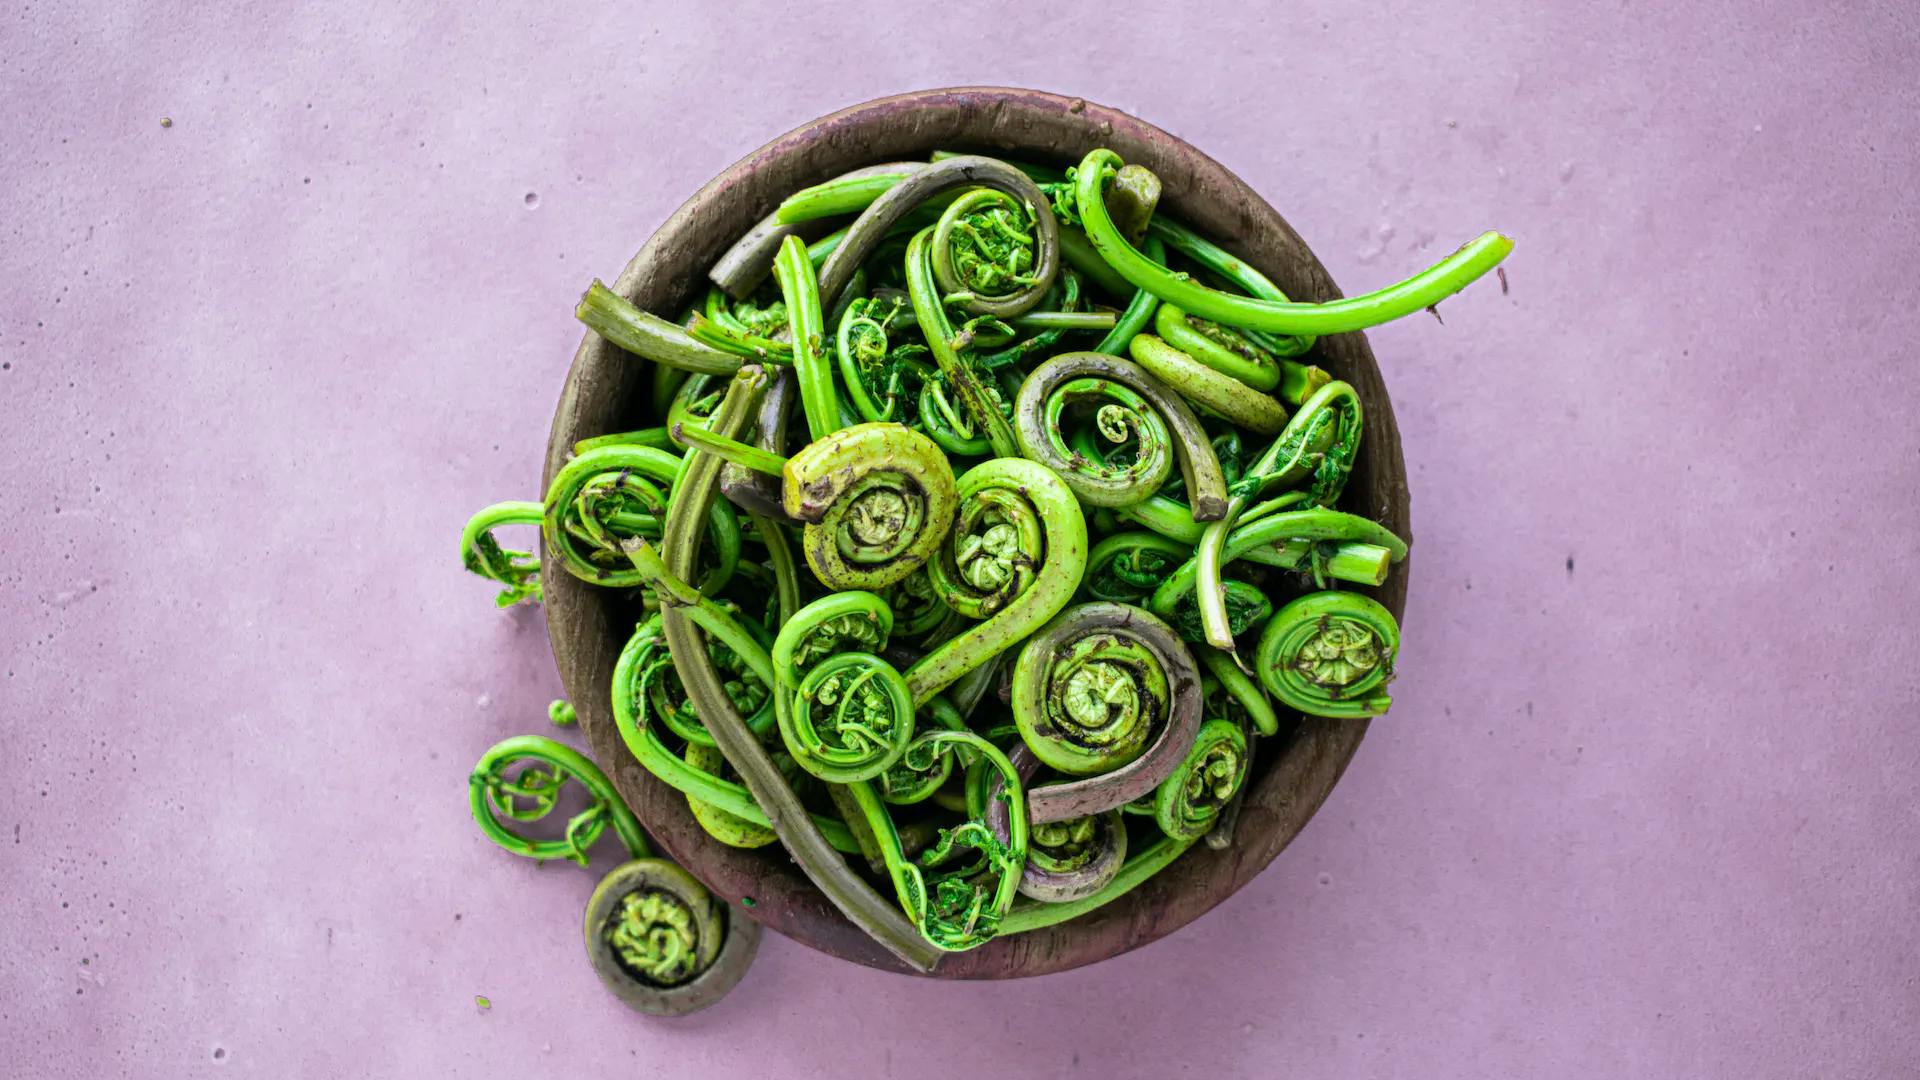 Finding Fiddleheads: Where Do Fiddleheads Grow in the Wild?